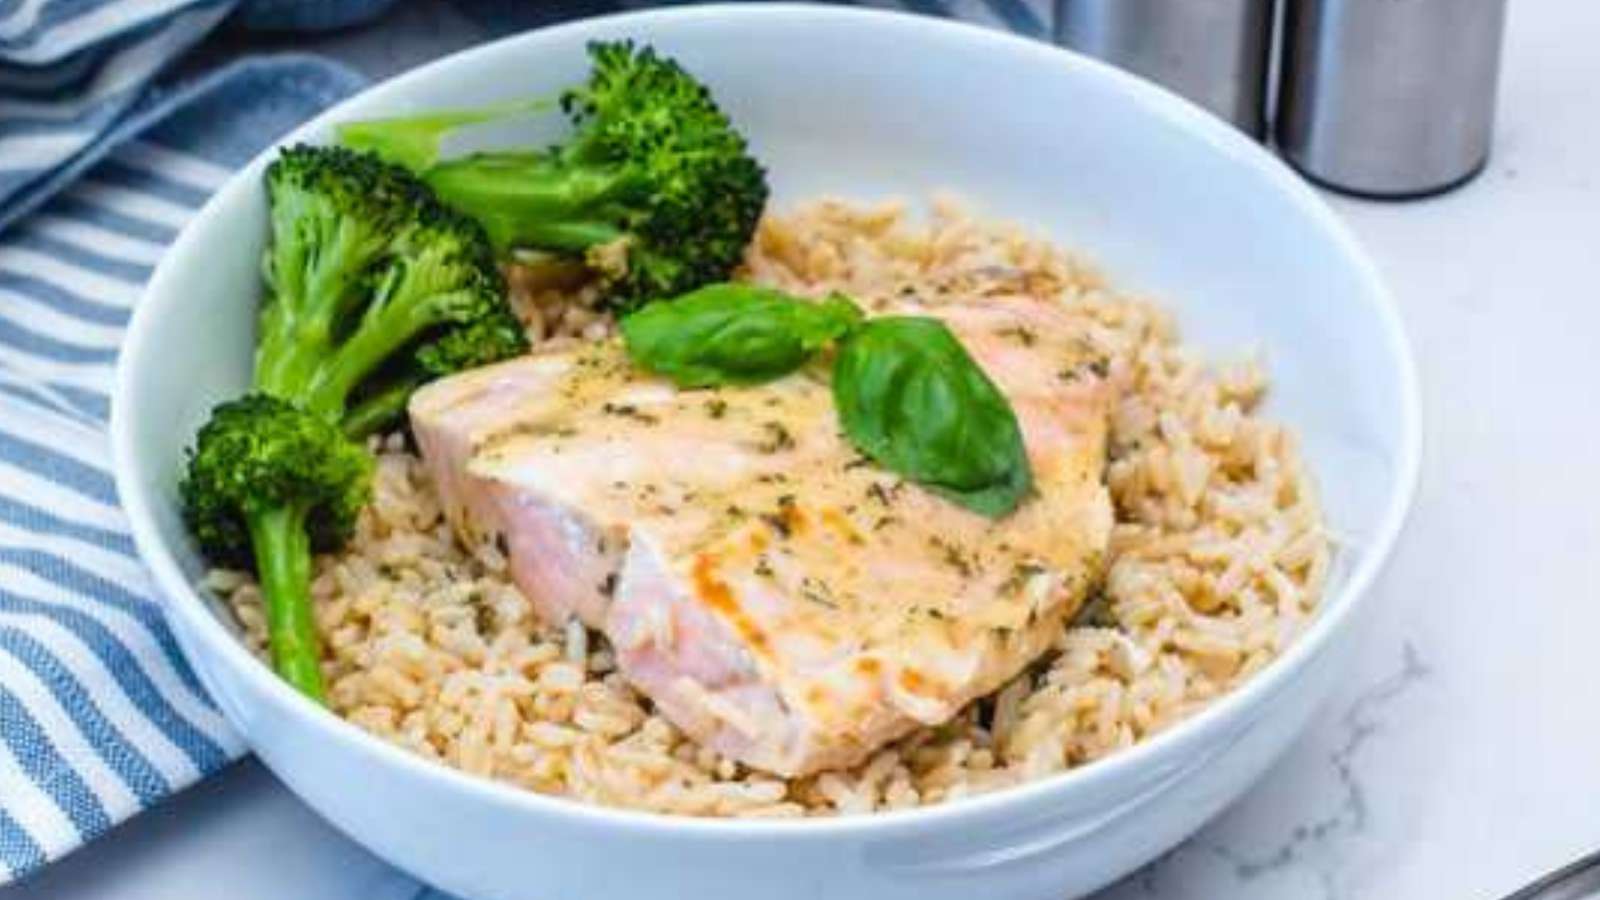 A white bowl filled with rice, salmon and broccoli.